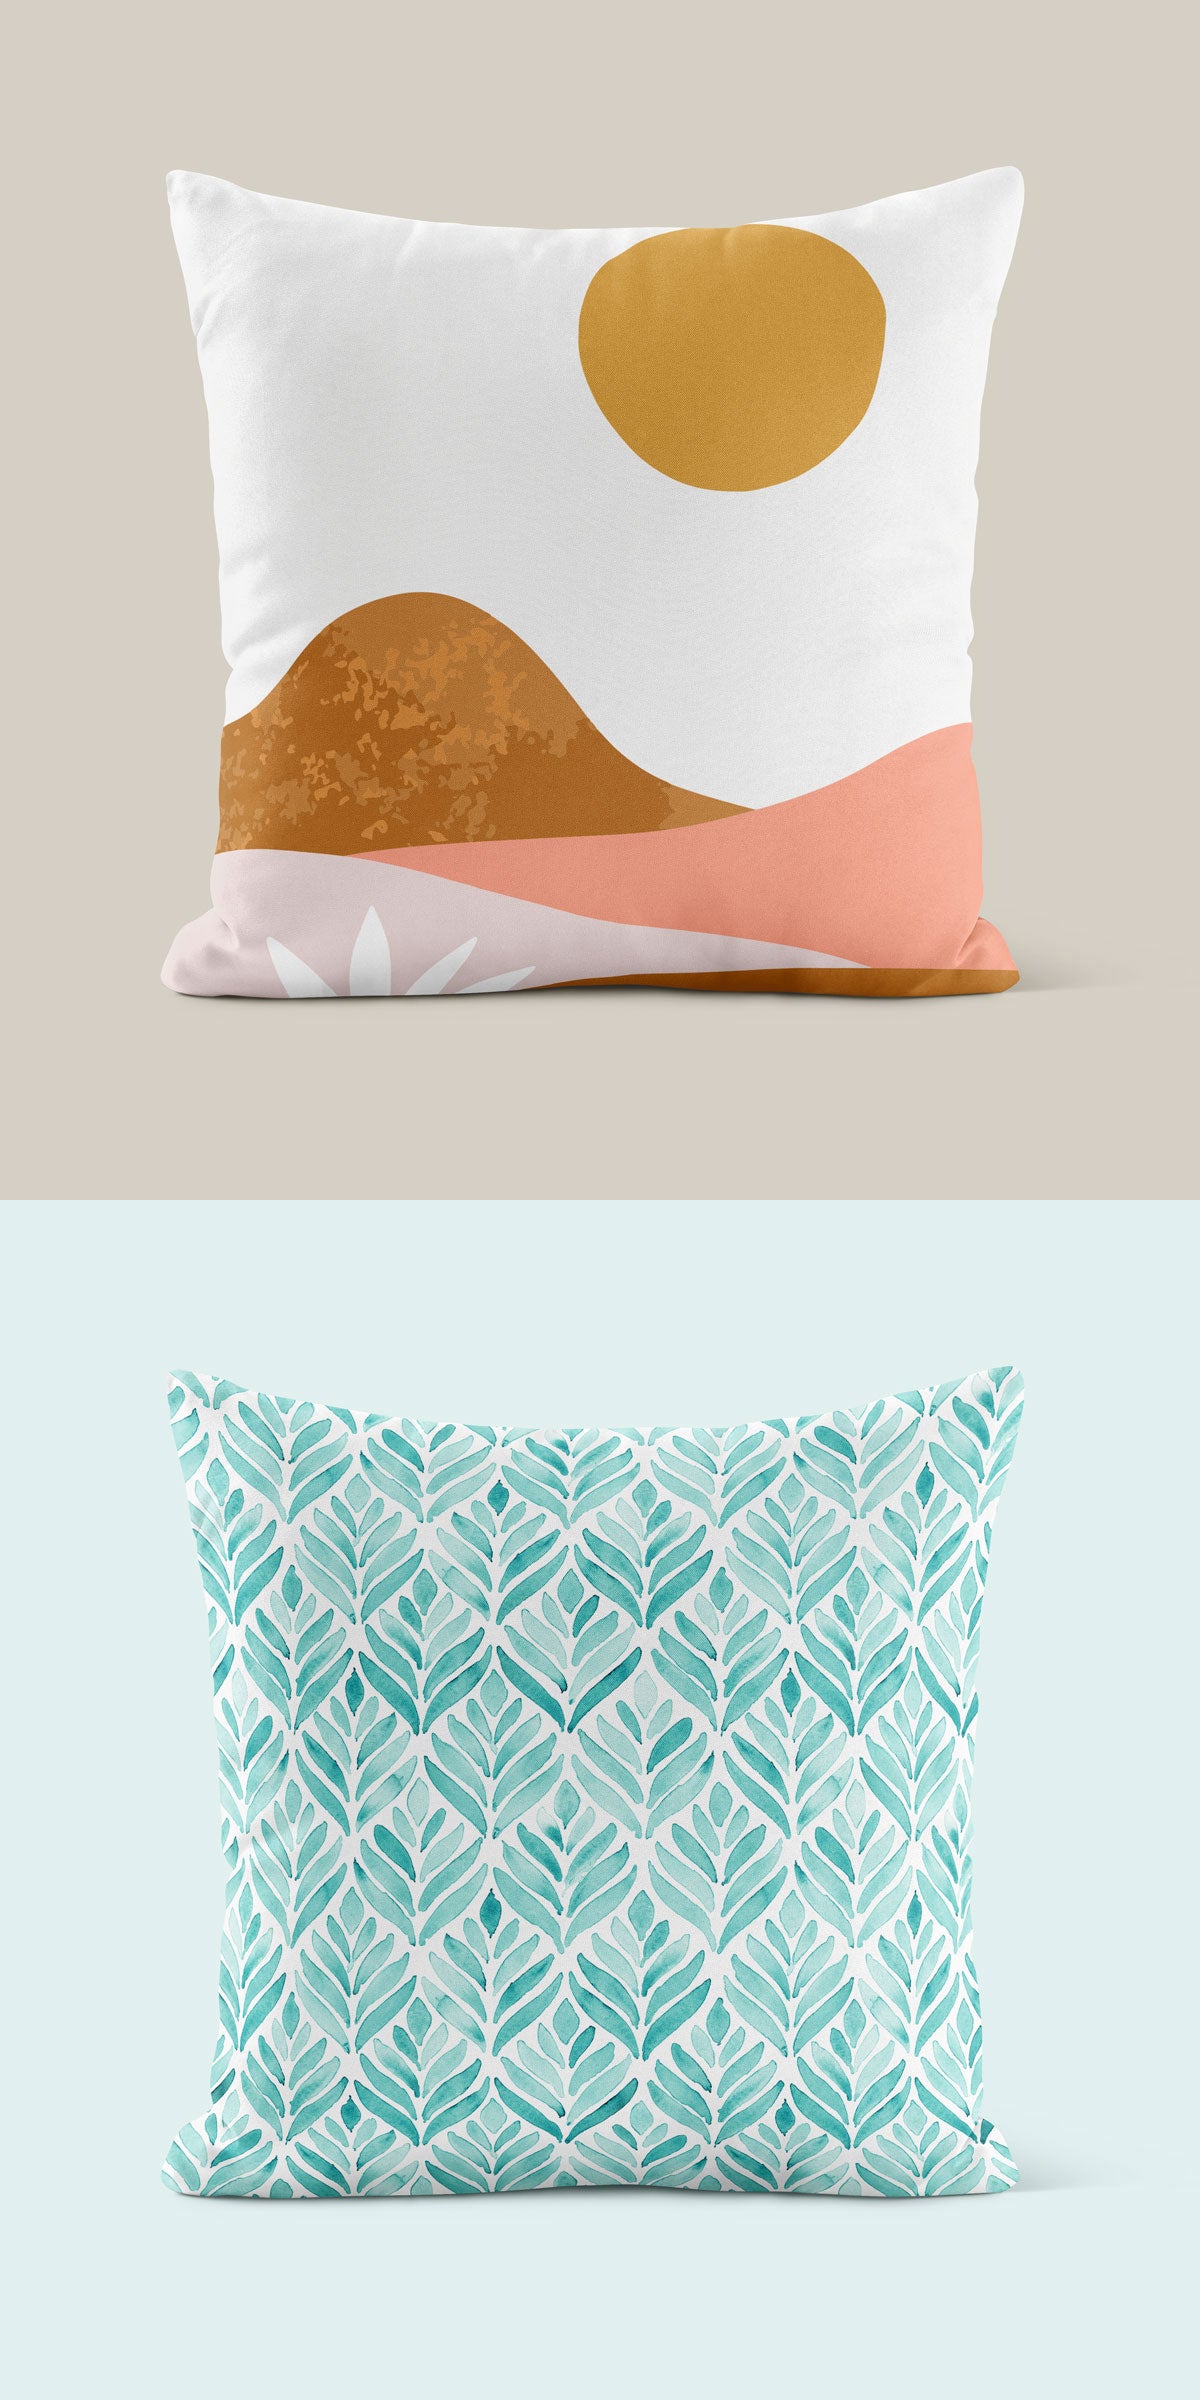 2 cushions with contrasting patterns